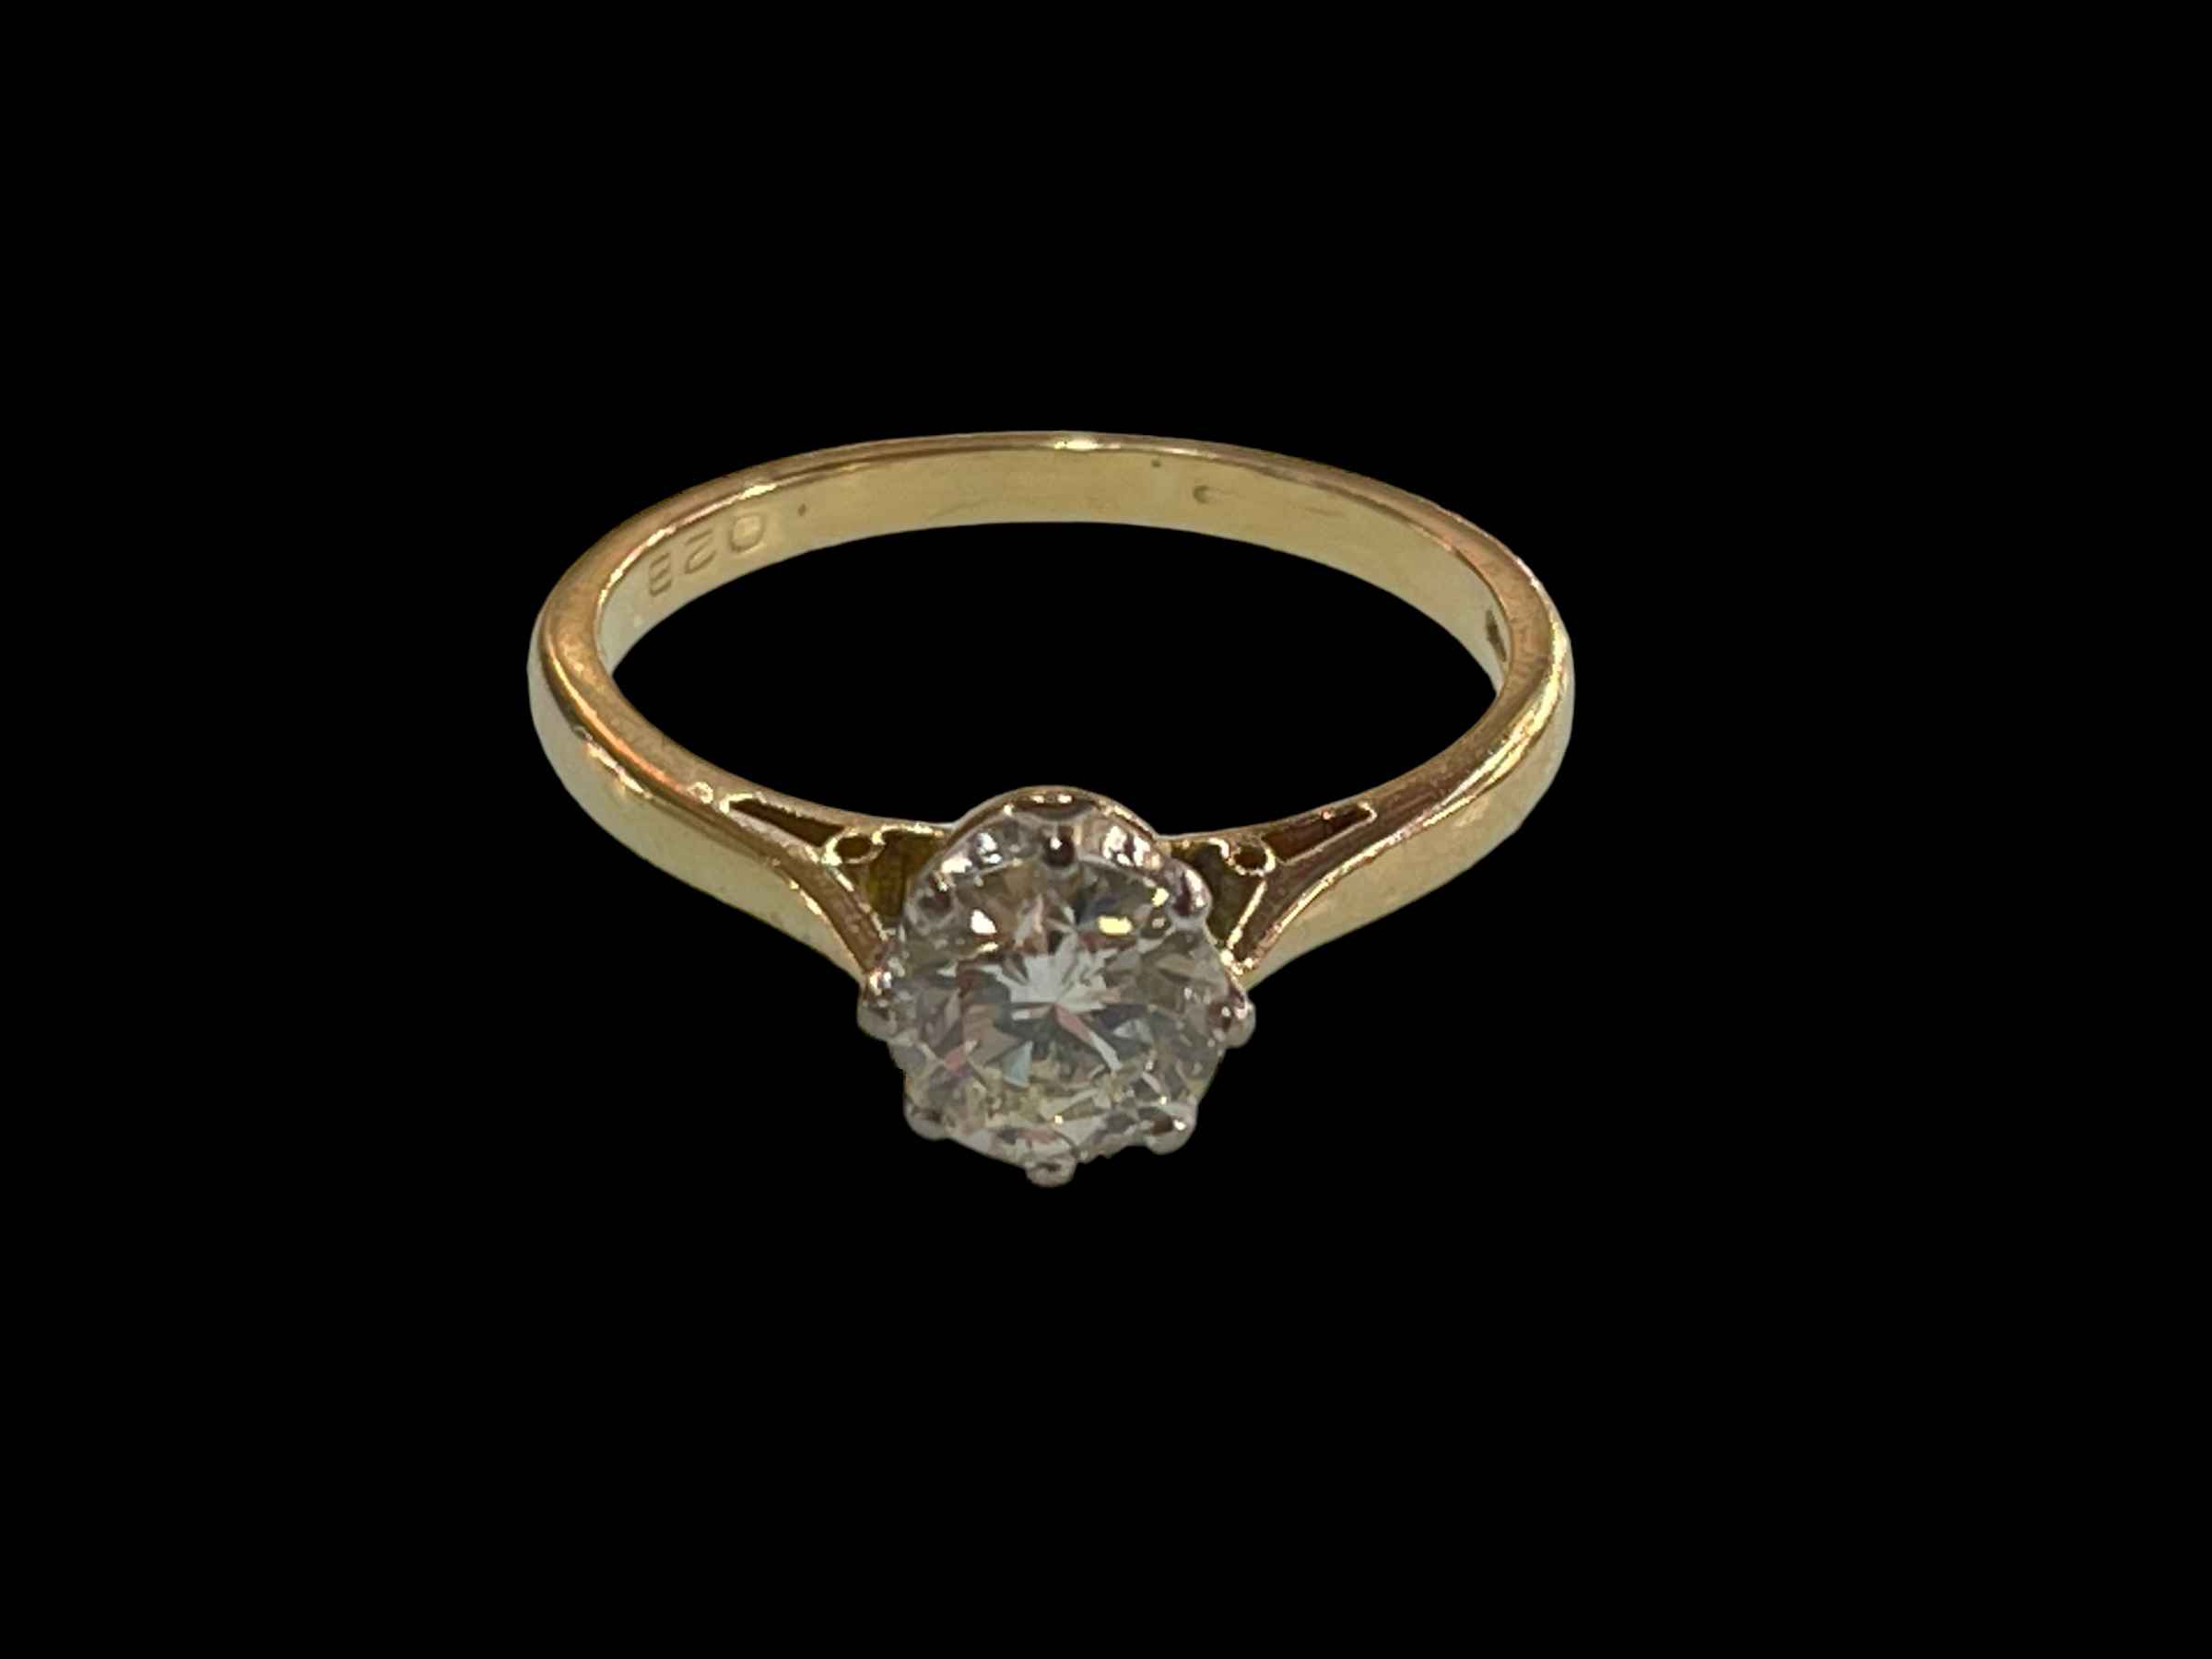 Approximately 1 carat diamond solitaire ring set in 18 carat yellow gold, size Q.